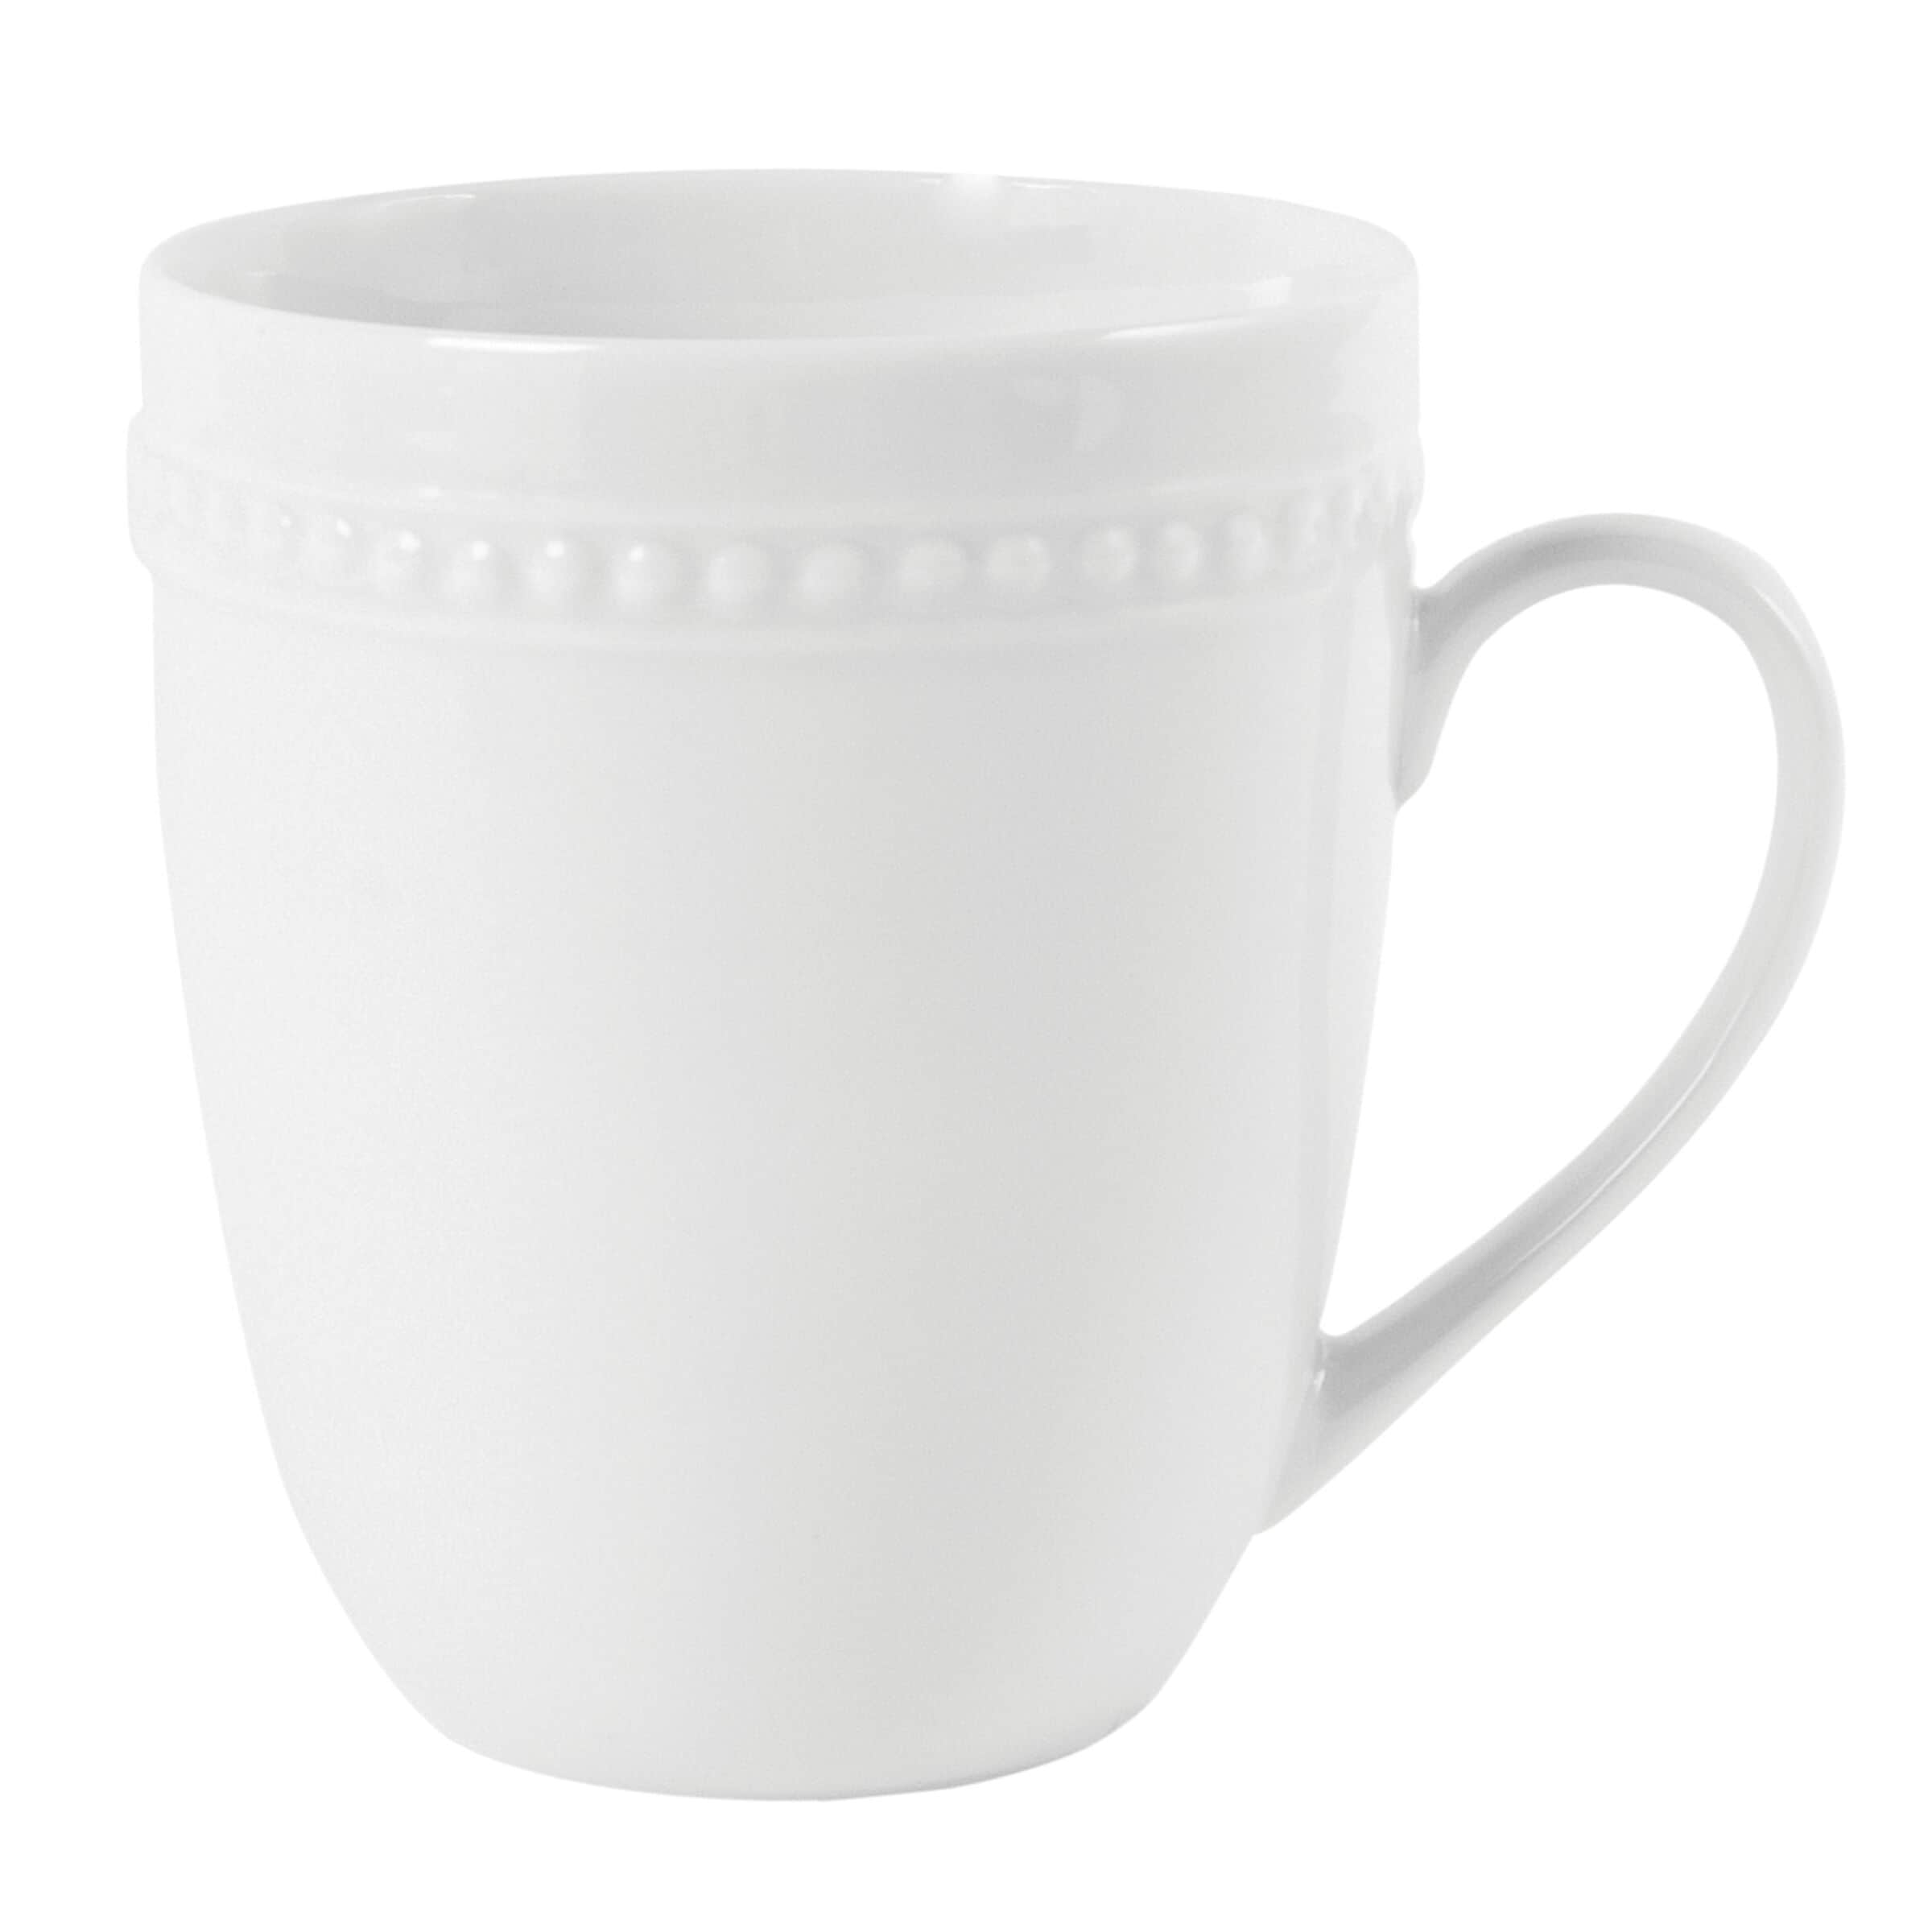 Everyday White by Fitz and Floyd Beaded 14 Ounce Mug, Set of 4